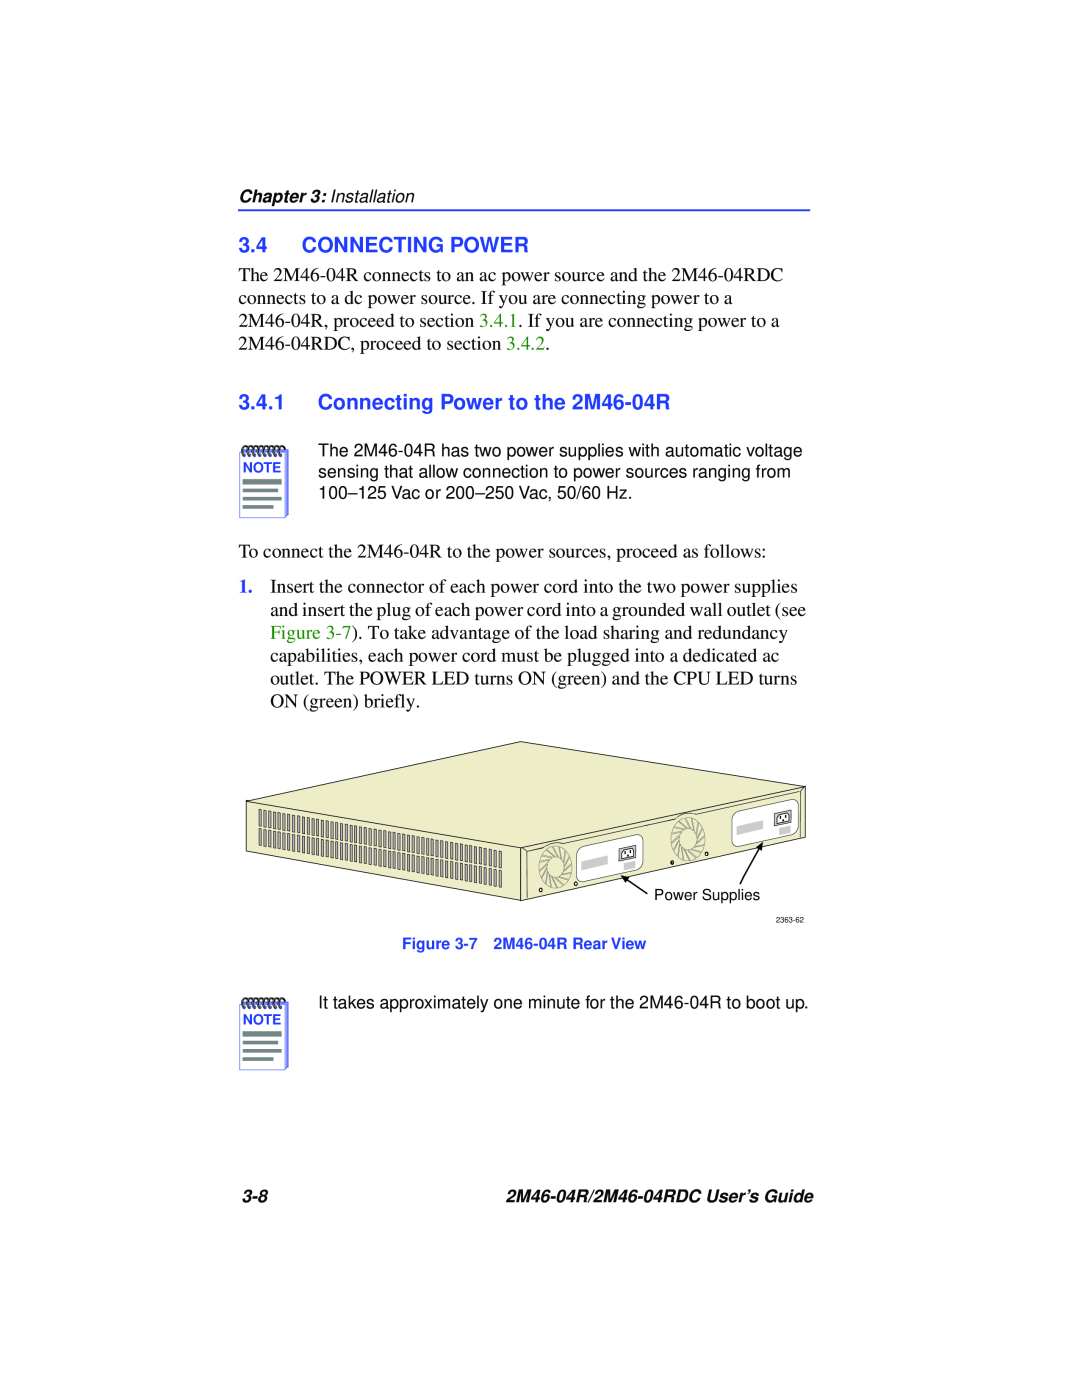 Cabletron Systems pmn manual Connecting Power to the 2M46-04R 